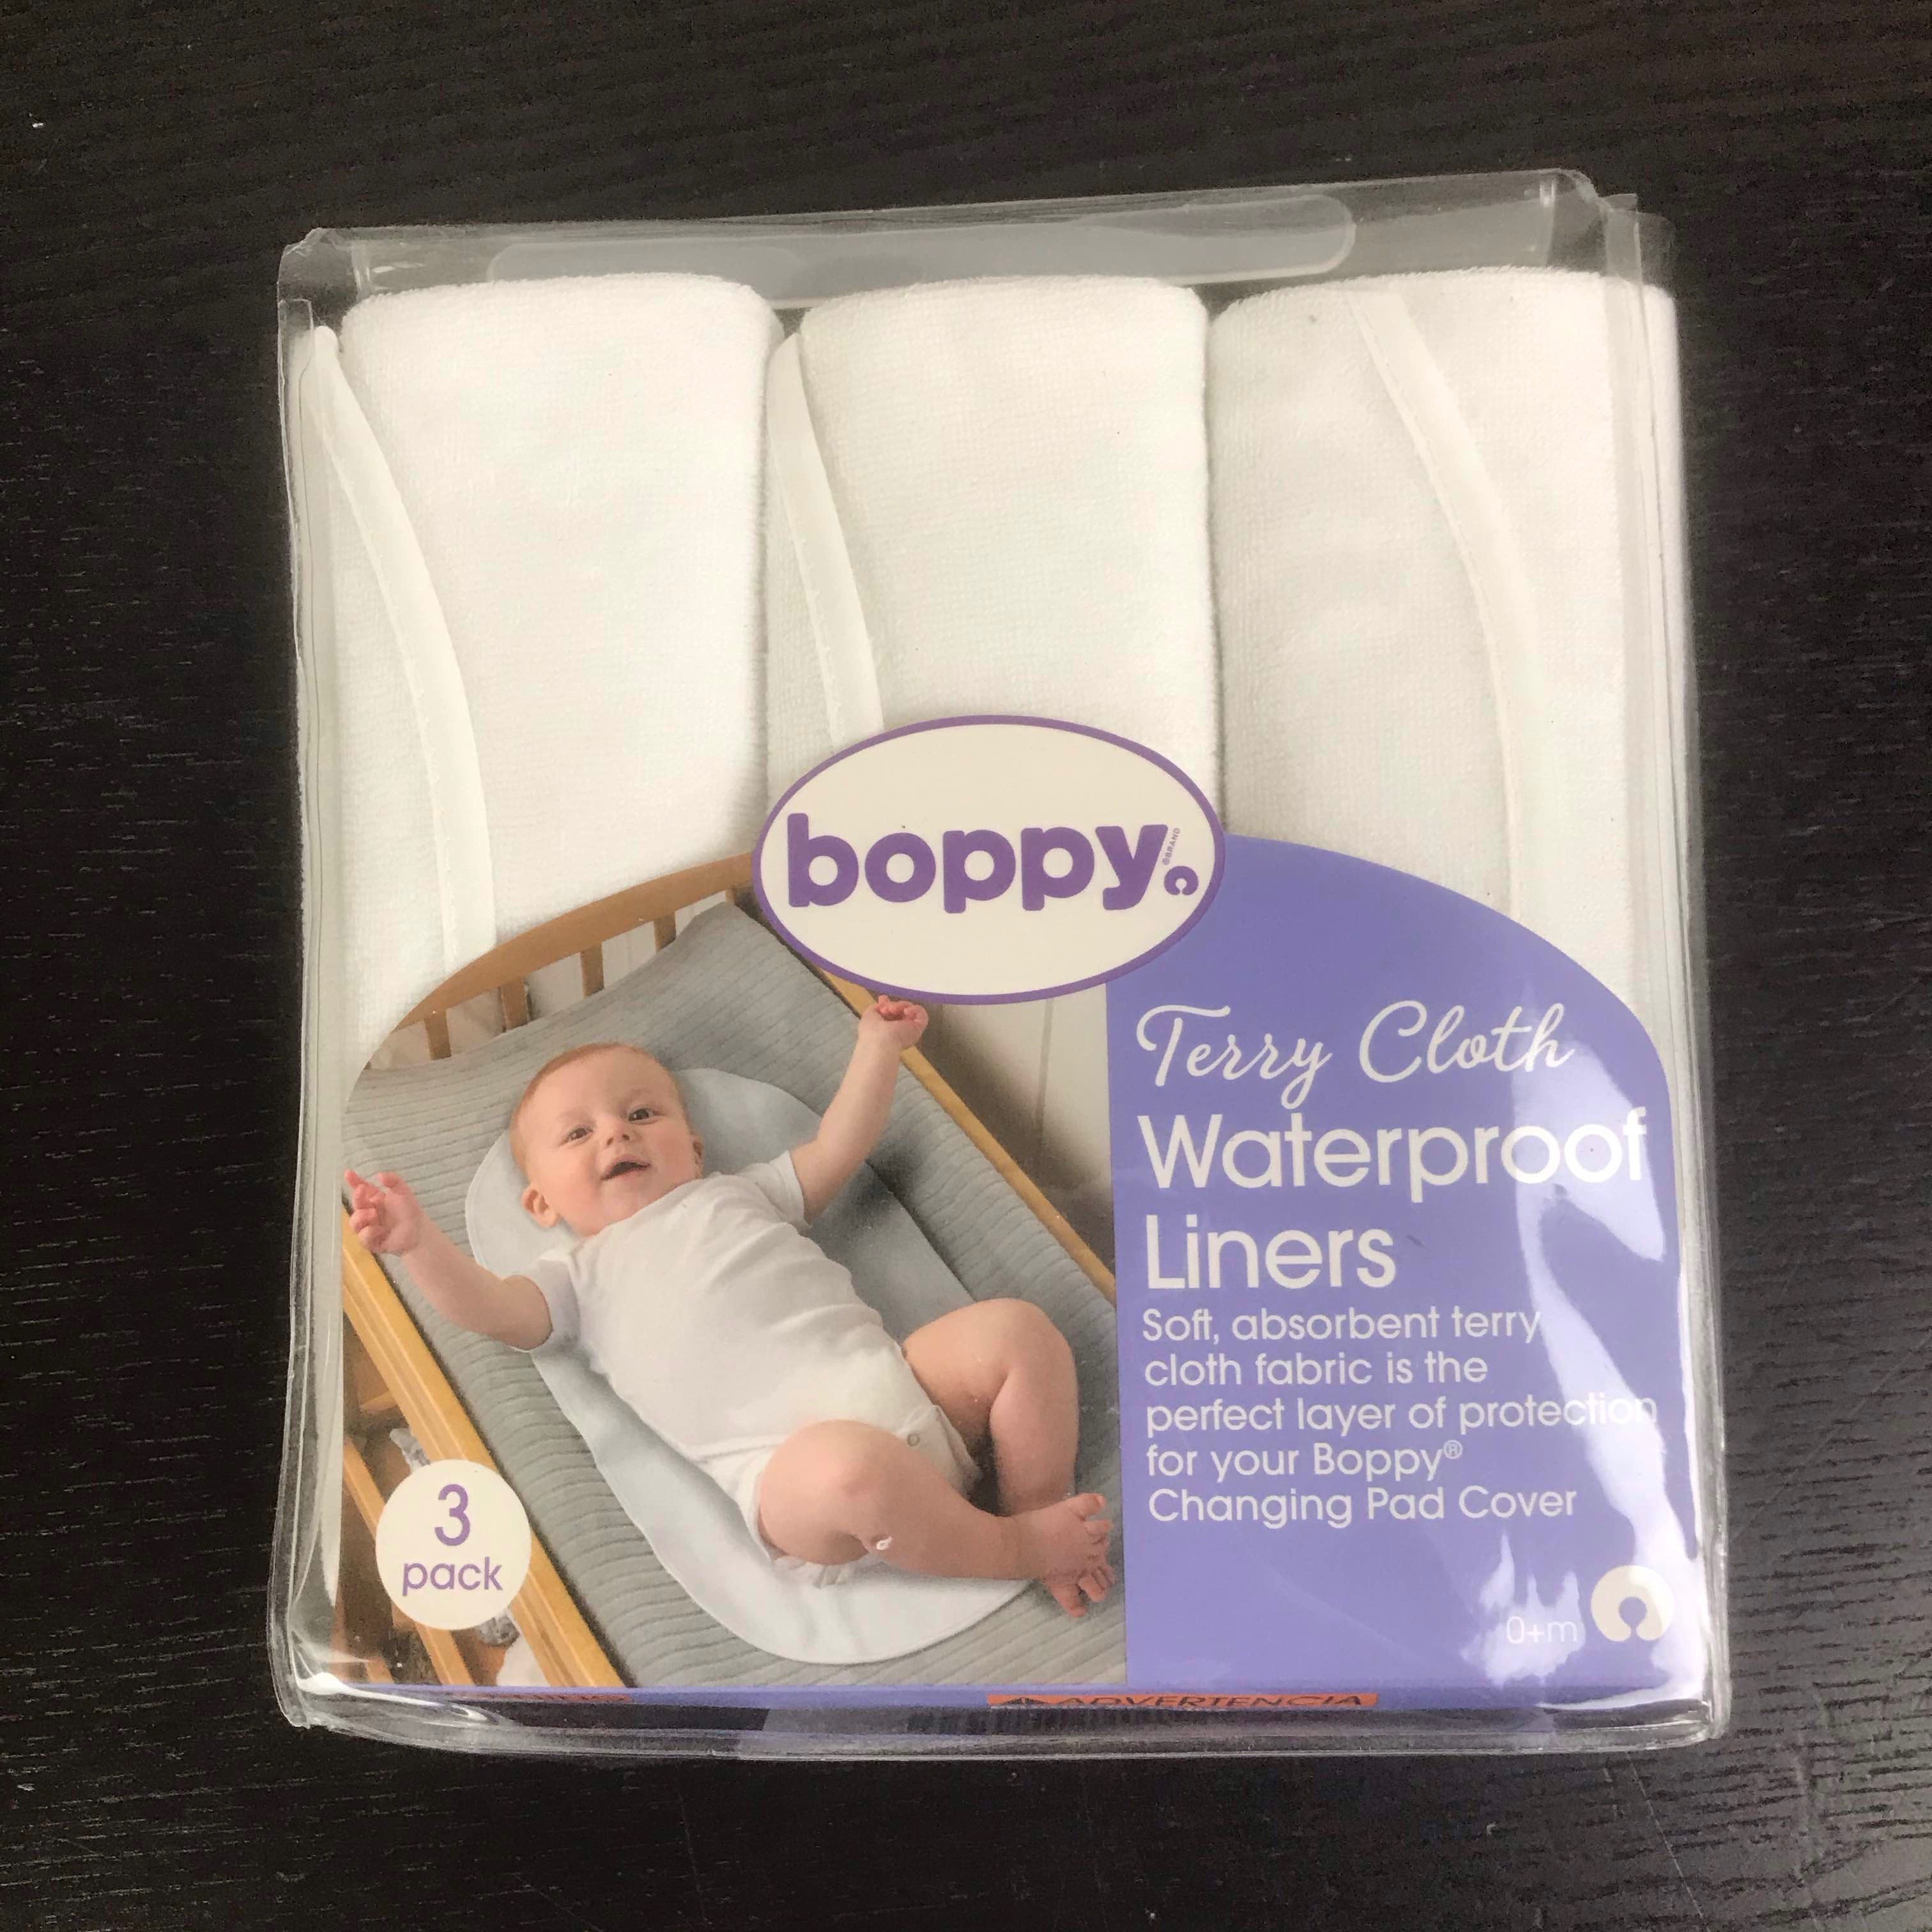 Boppy Changing Pad Liners 3 Count White by Boppy - おむつ替えマット、シート